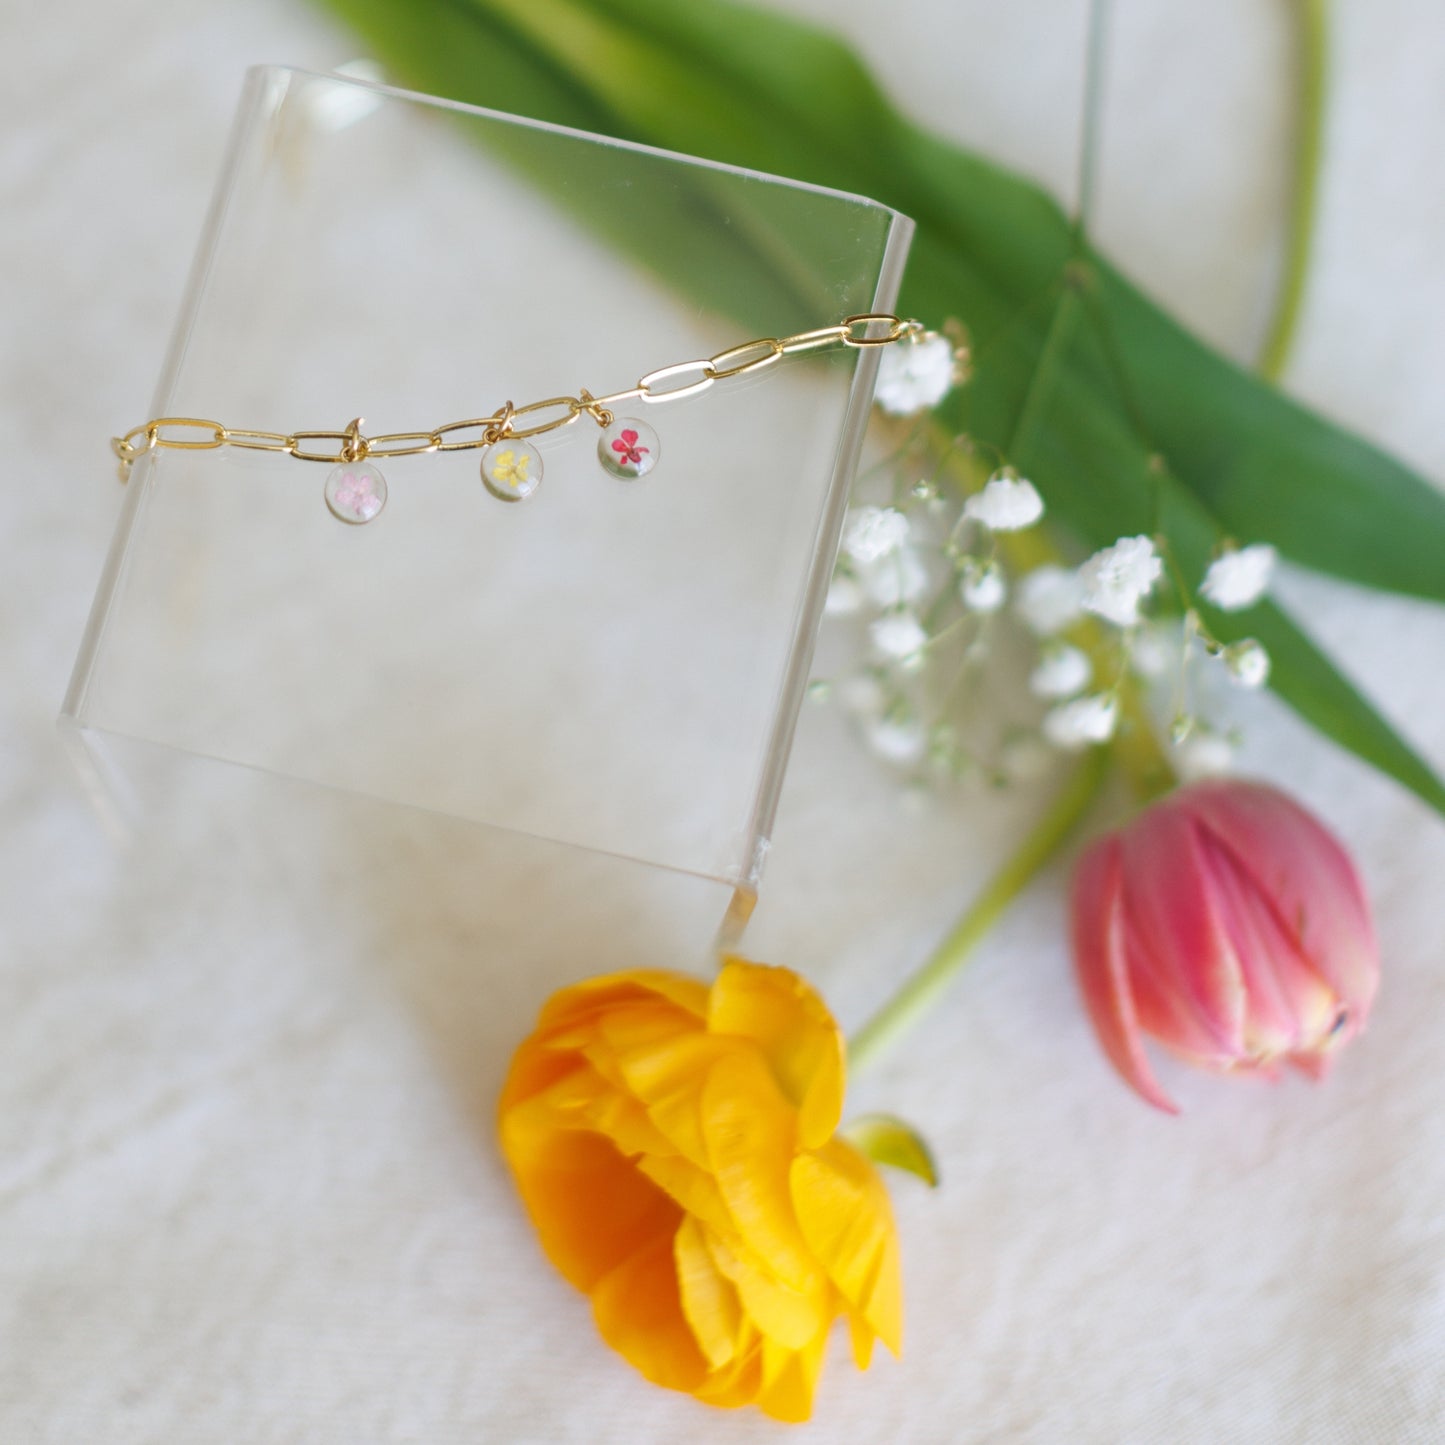 Birth Flower Paperclip Necklace